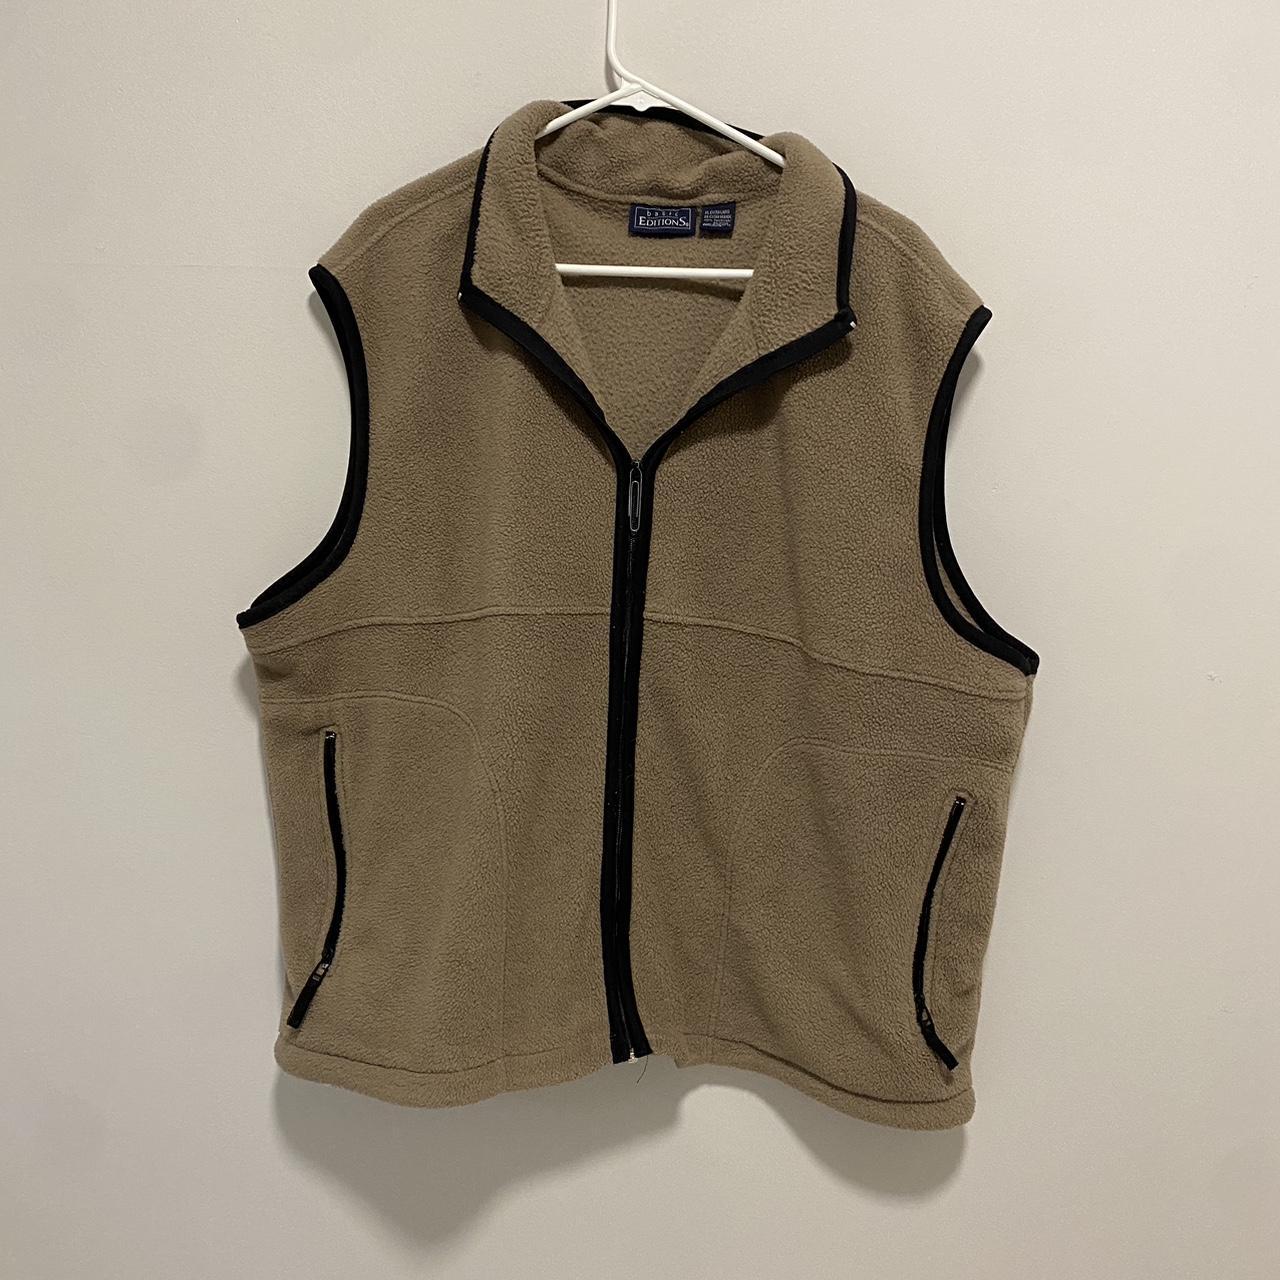 Basic Editions Men's Tan and Navy Gilet